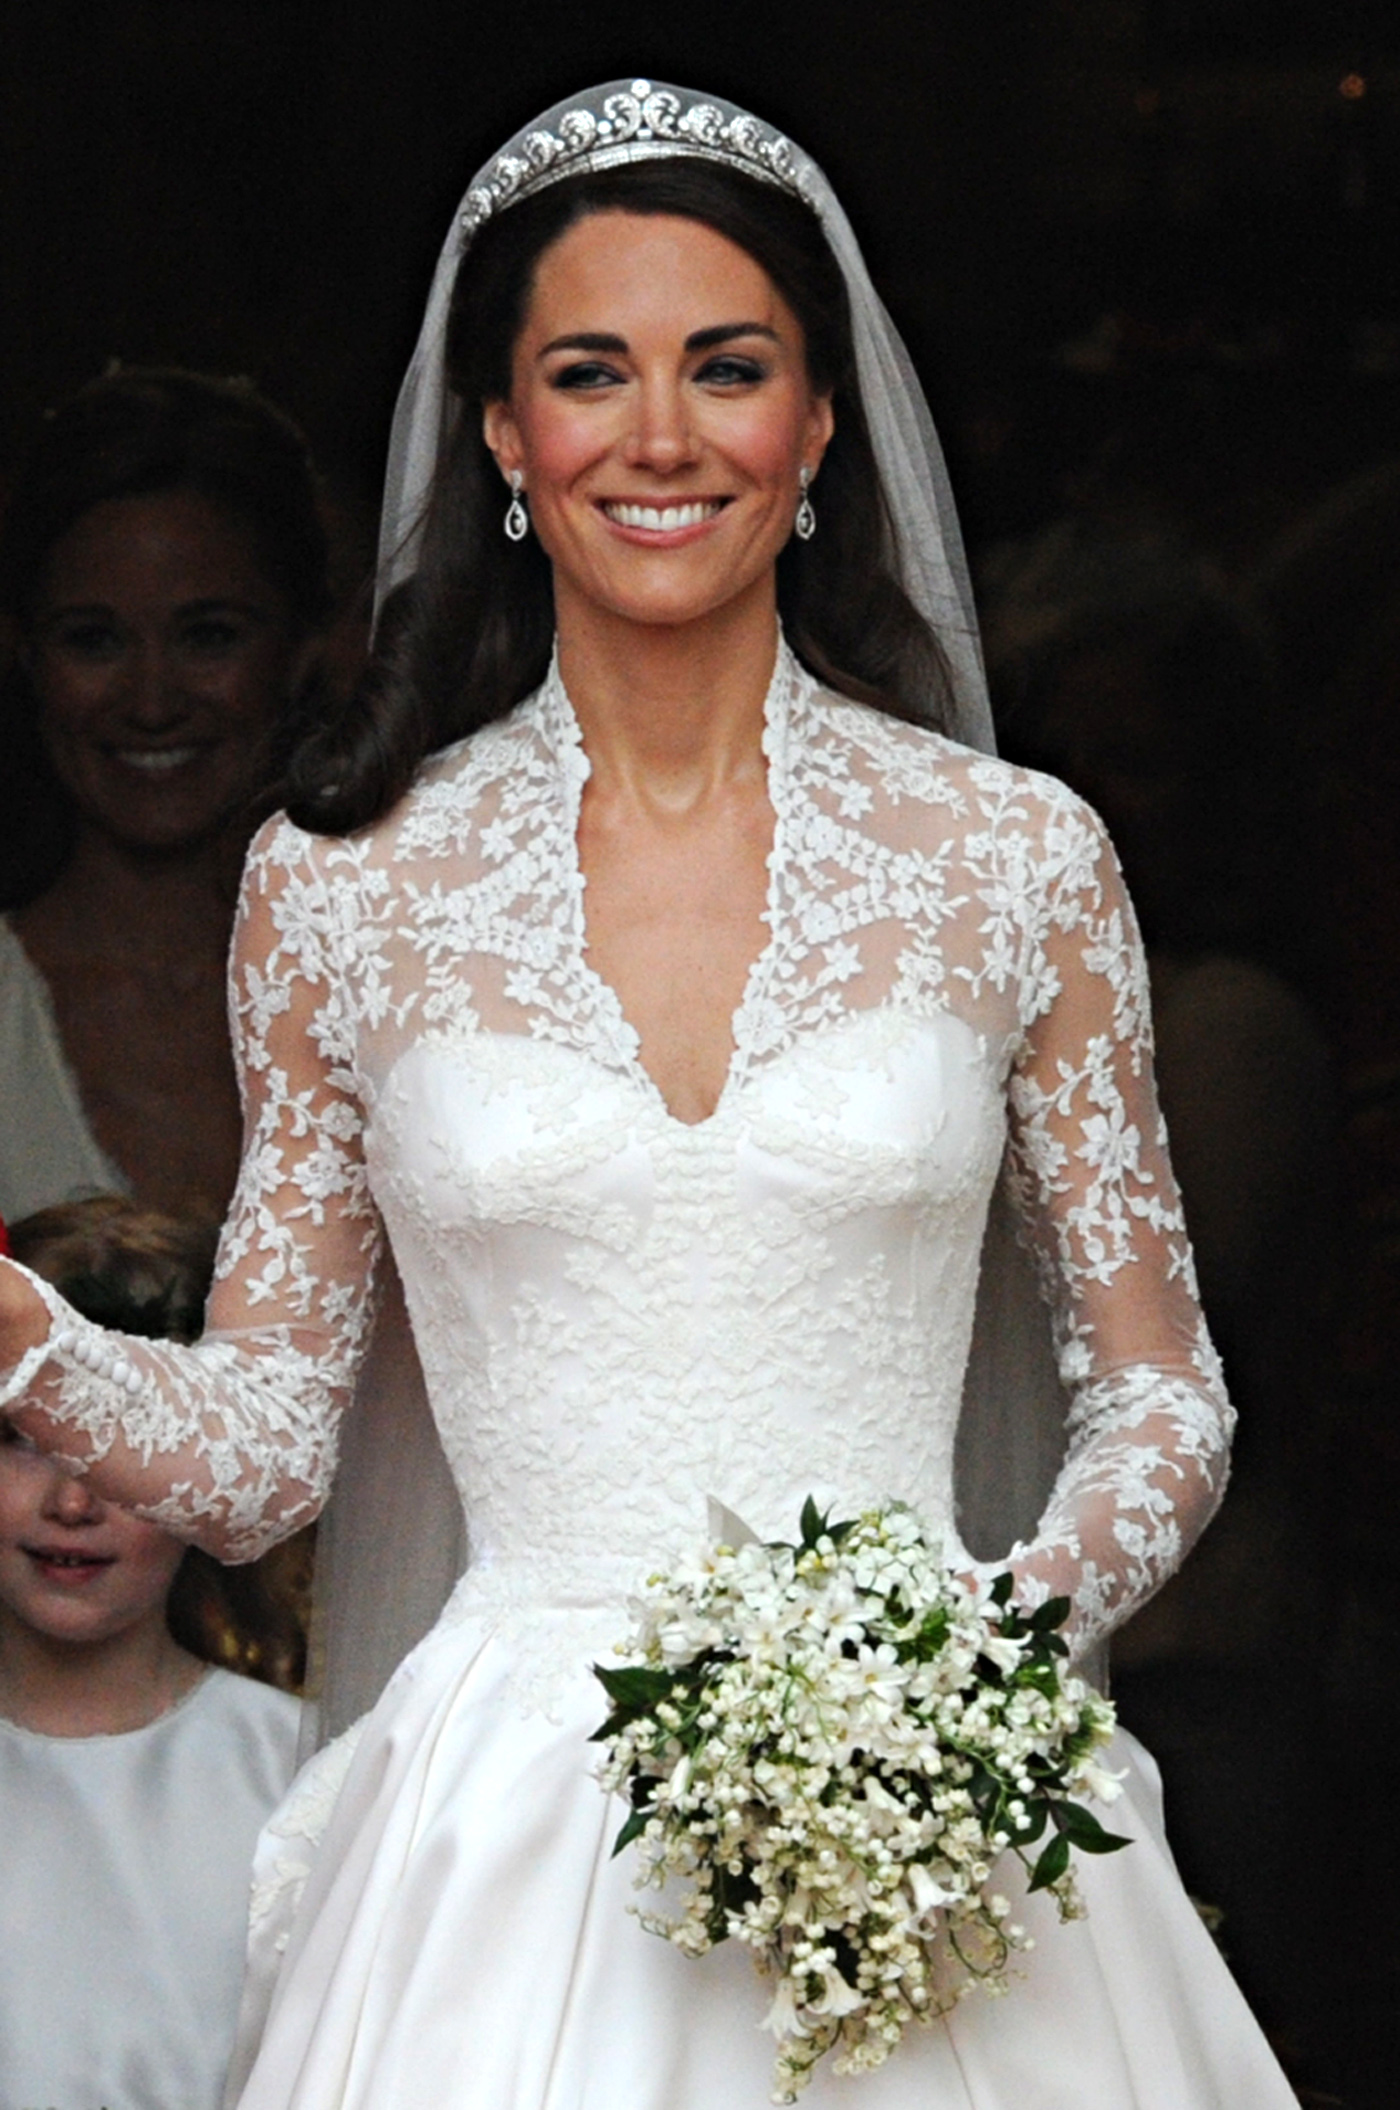 PHOTO: Kate, Duchess of Cambridge following her wedding ceremony on April 29, 2011.  